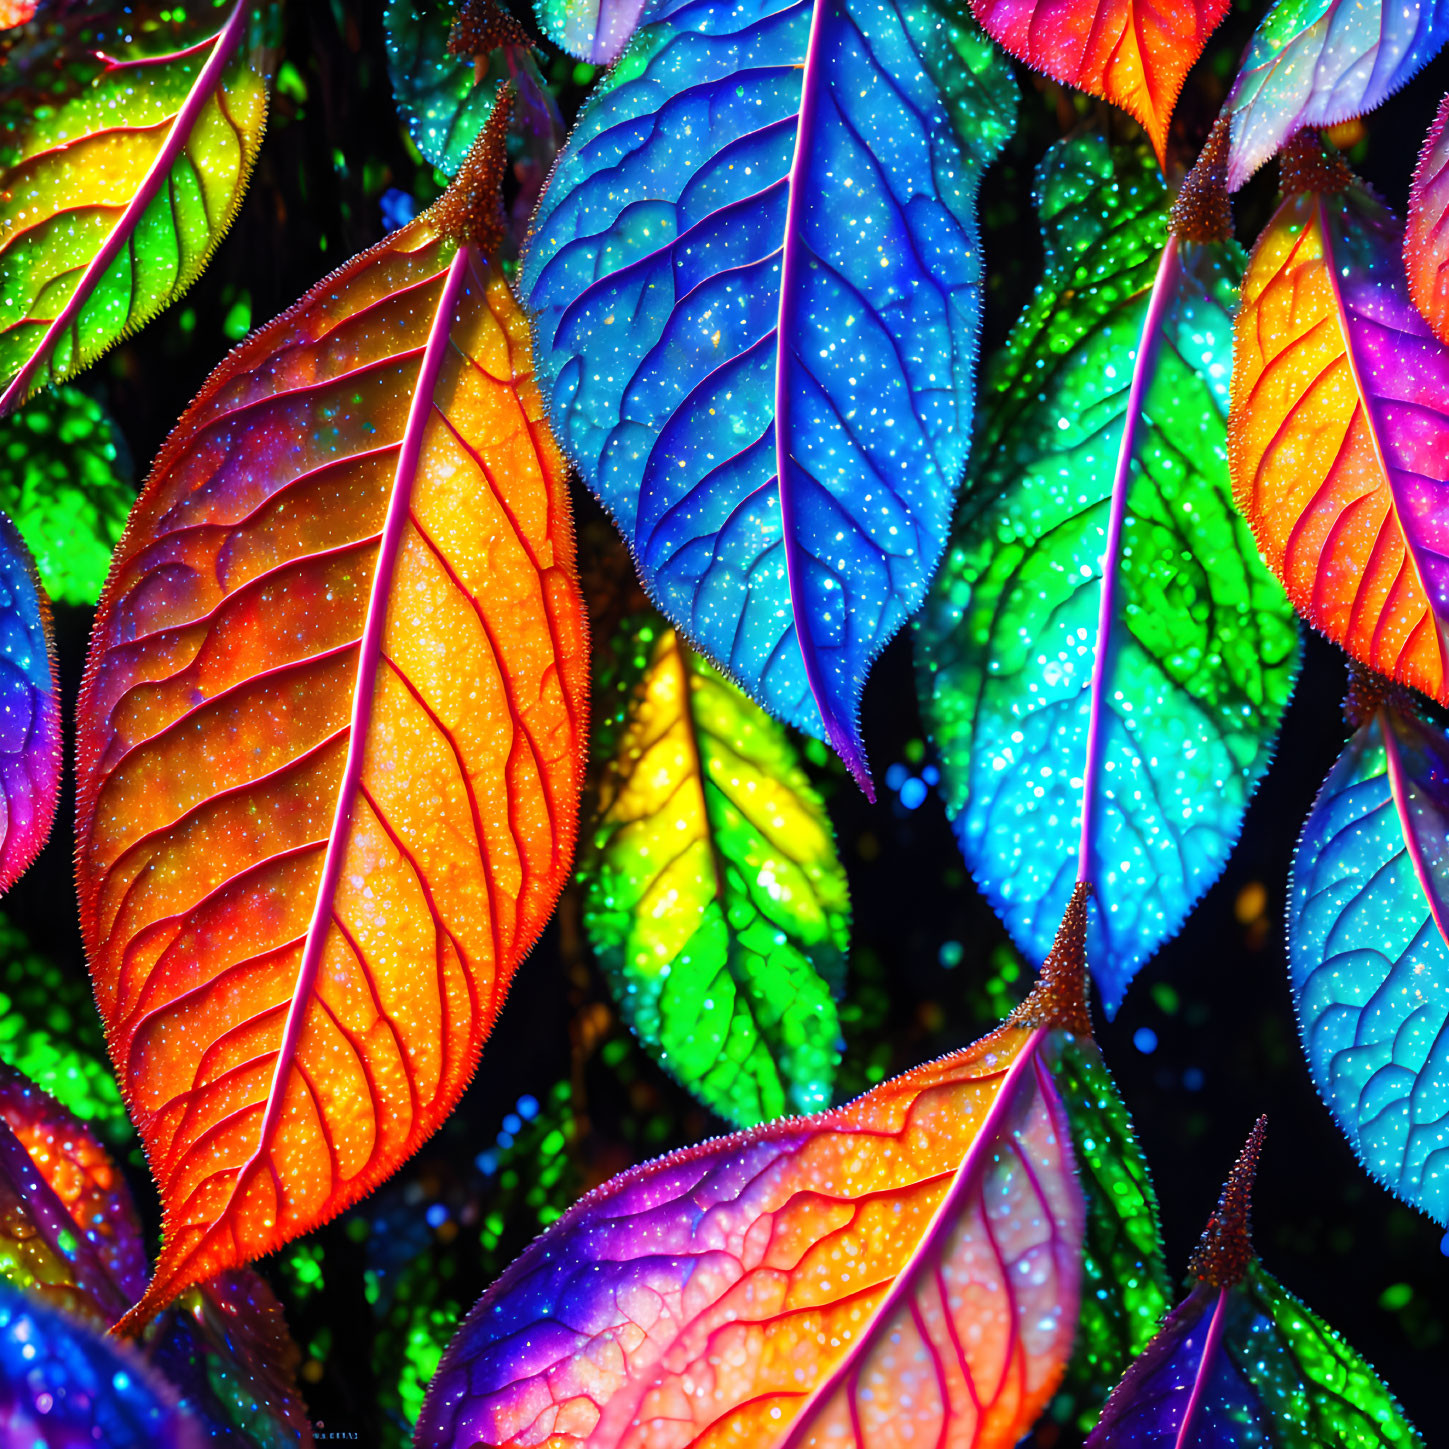 Multicolored Leaves with Dewdrops in Blue, Green, Orange, and Red